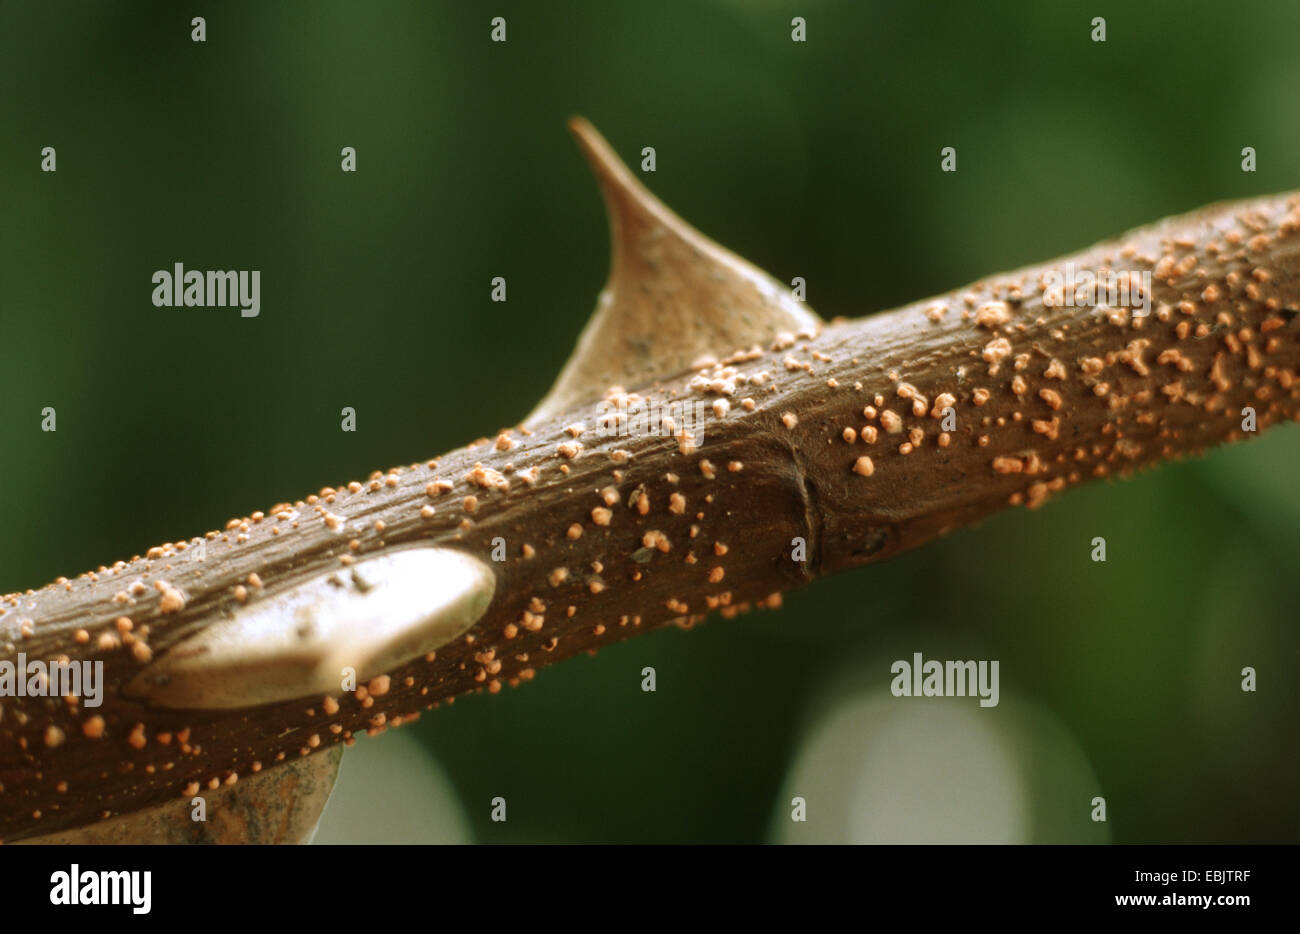 coral spot (Nectria cinnabarina), on a rose twig, Germany Stock Photo